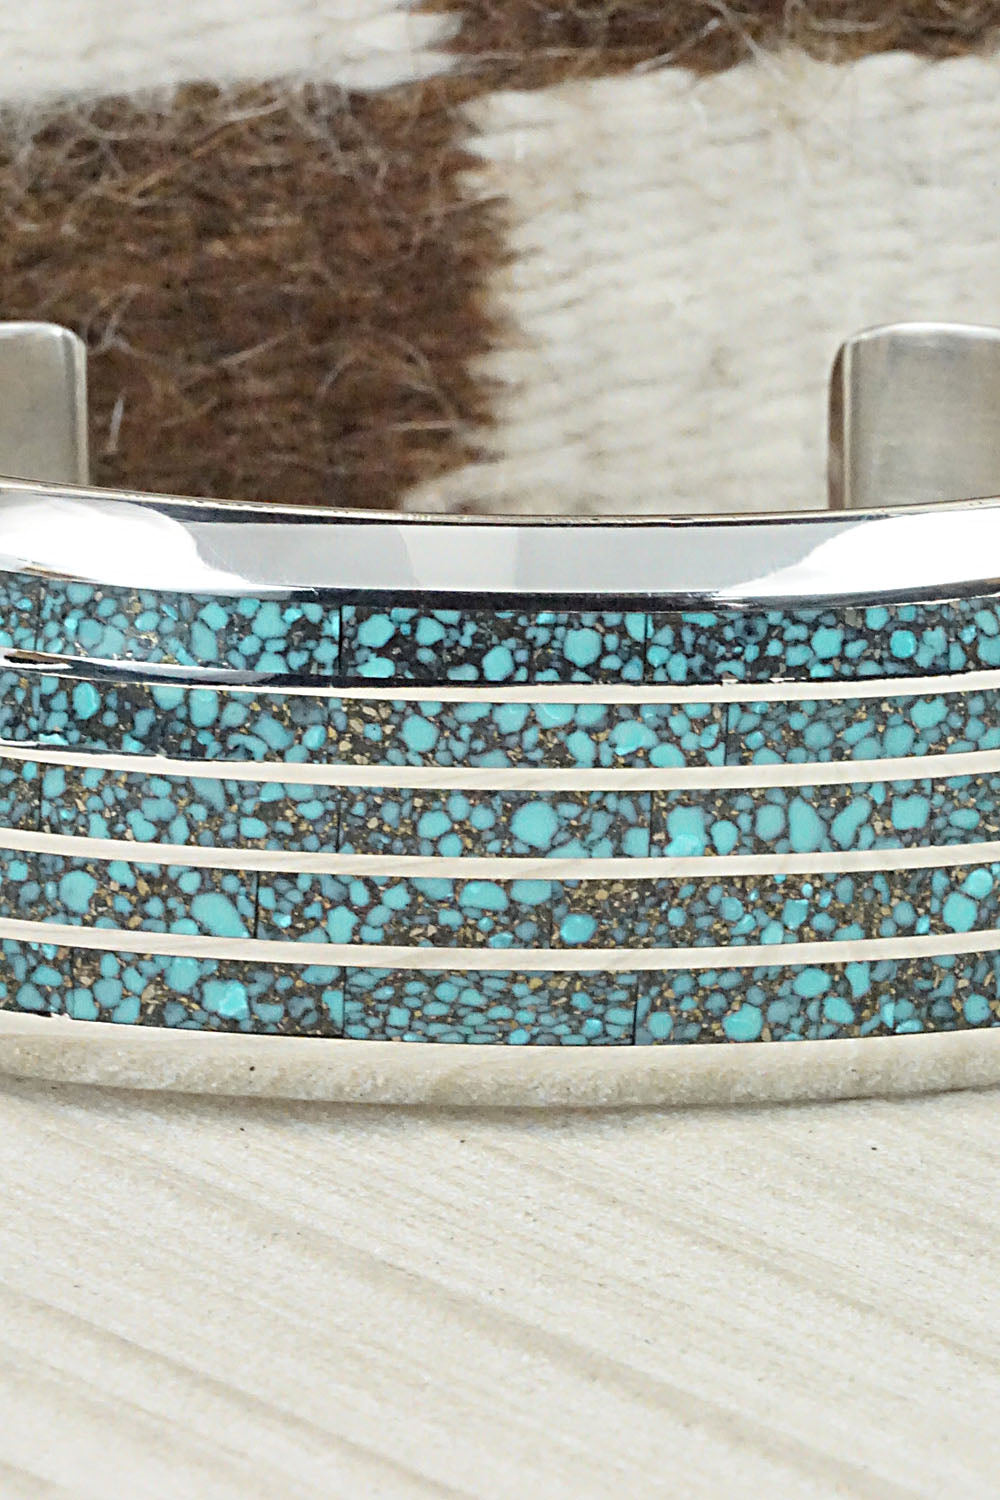 Turquoise & Sterling Silver Inlay Bracelet - Larry Loretto